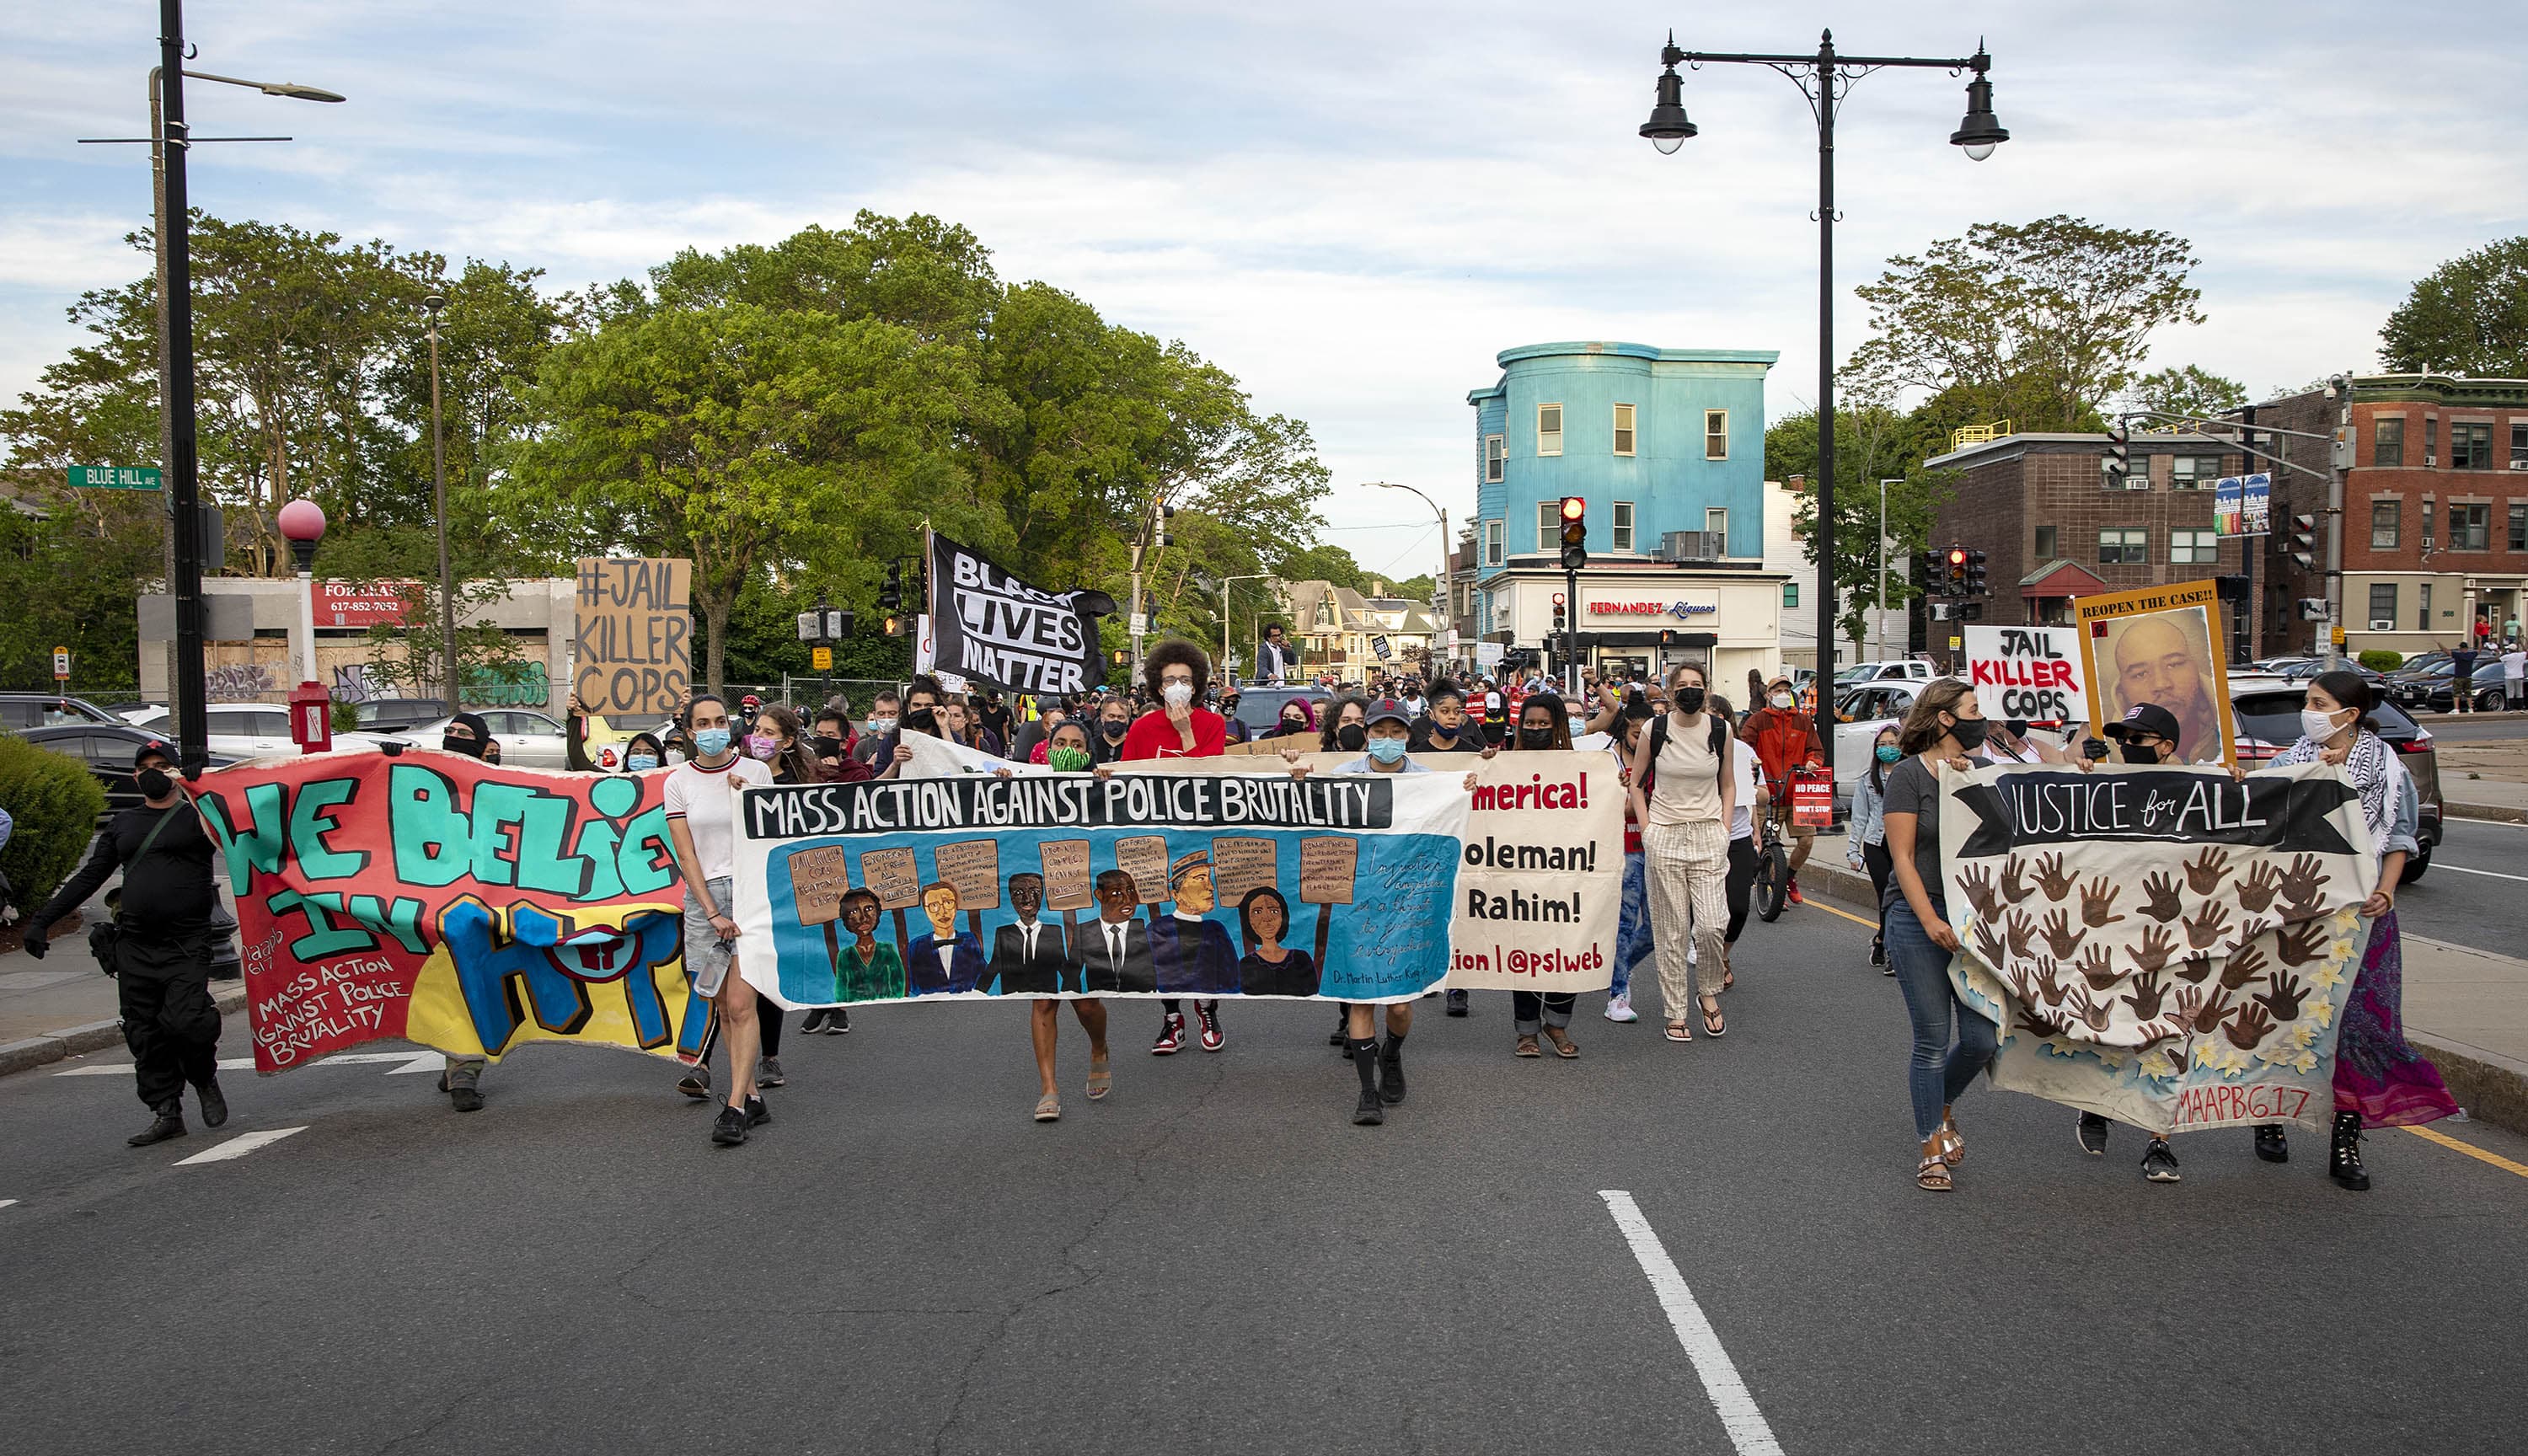 Demonstrators from the Mass. Action Against Police Brutality rally march along Seaver Street in Boston on Tuesday night. (Robin Lubbock/WBUR)